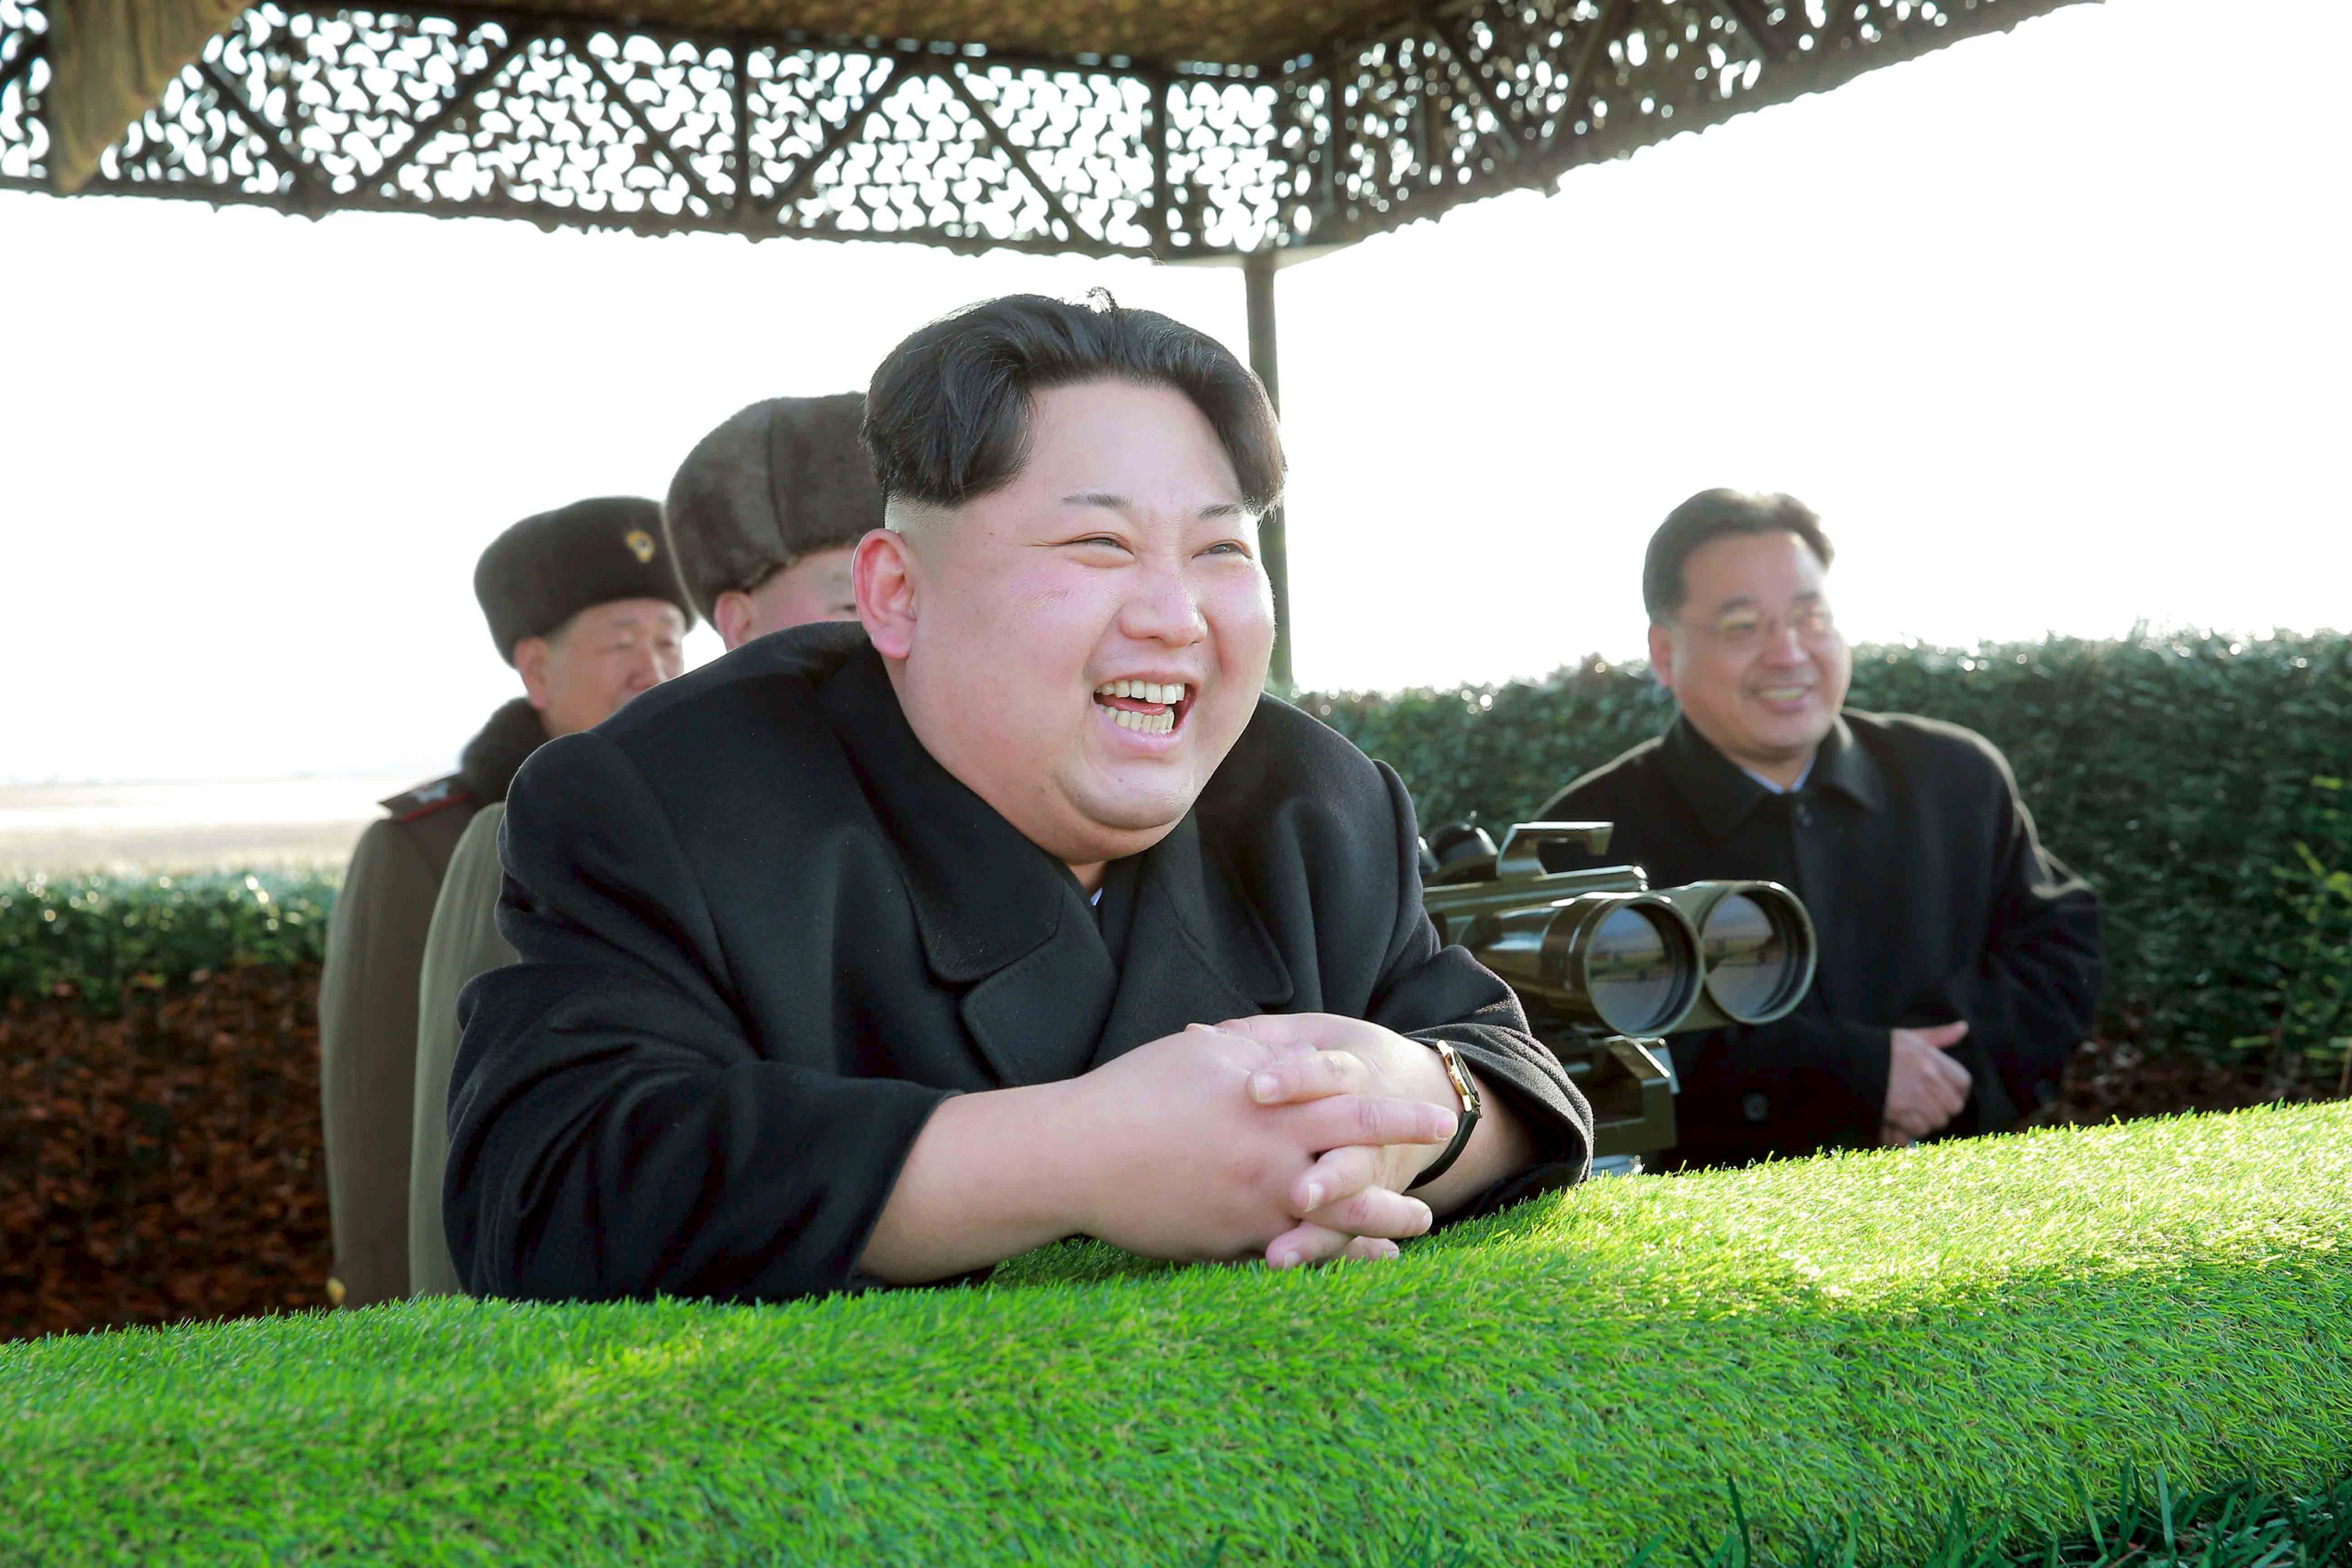 North Korean leader Kim Jong Un reacts during a test-fire of an anti-tank guided weapon in this undated photo released by North Korea's Korean Central News Agency (KCNA) in Pyongyang February 27, 2015. (KCNA—Reuters)